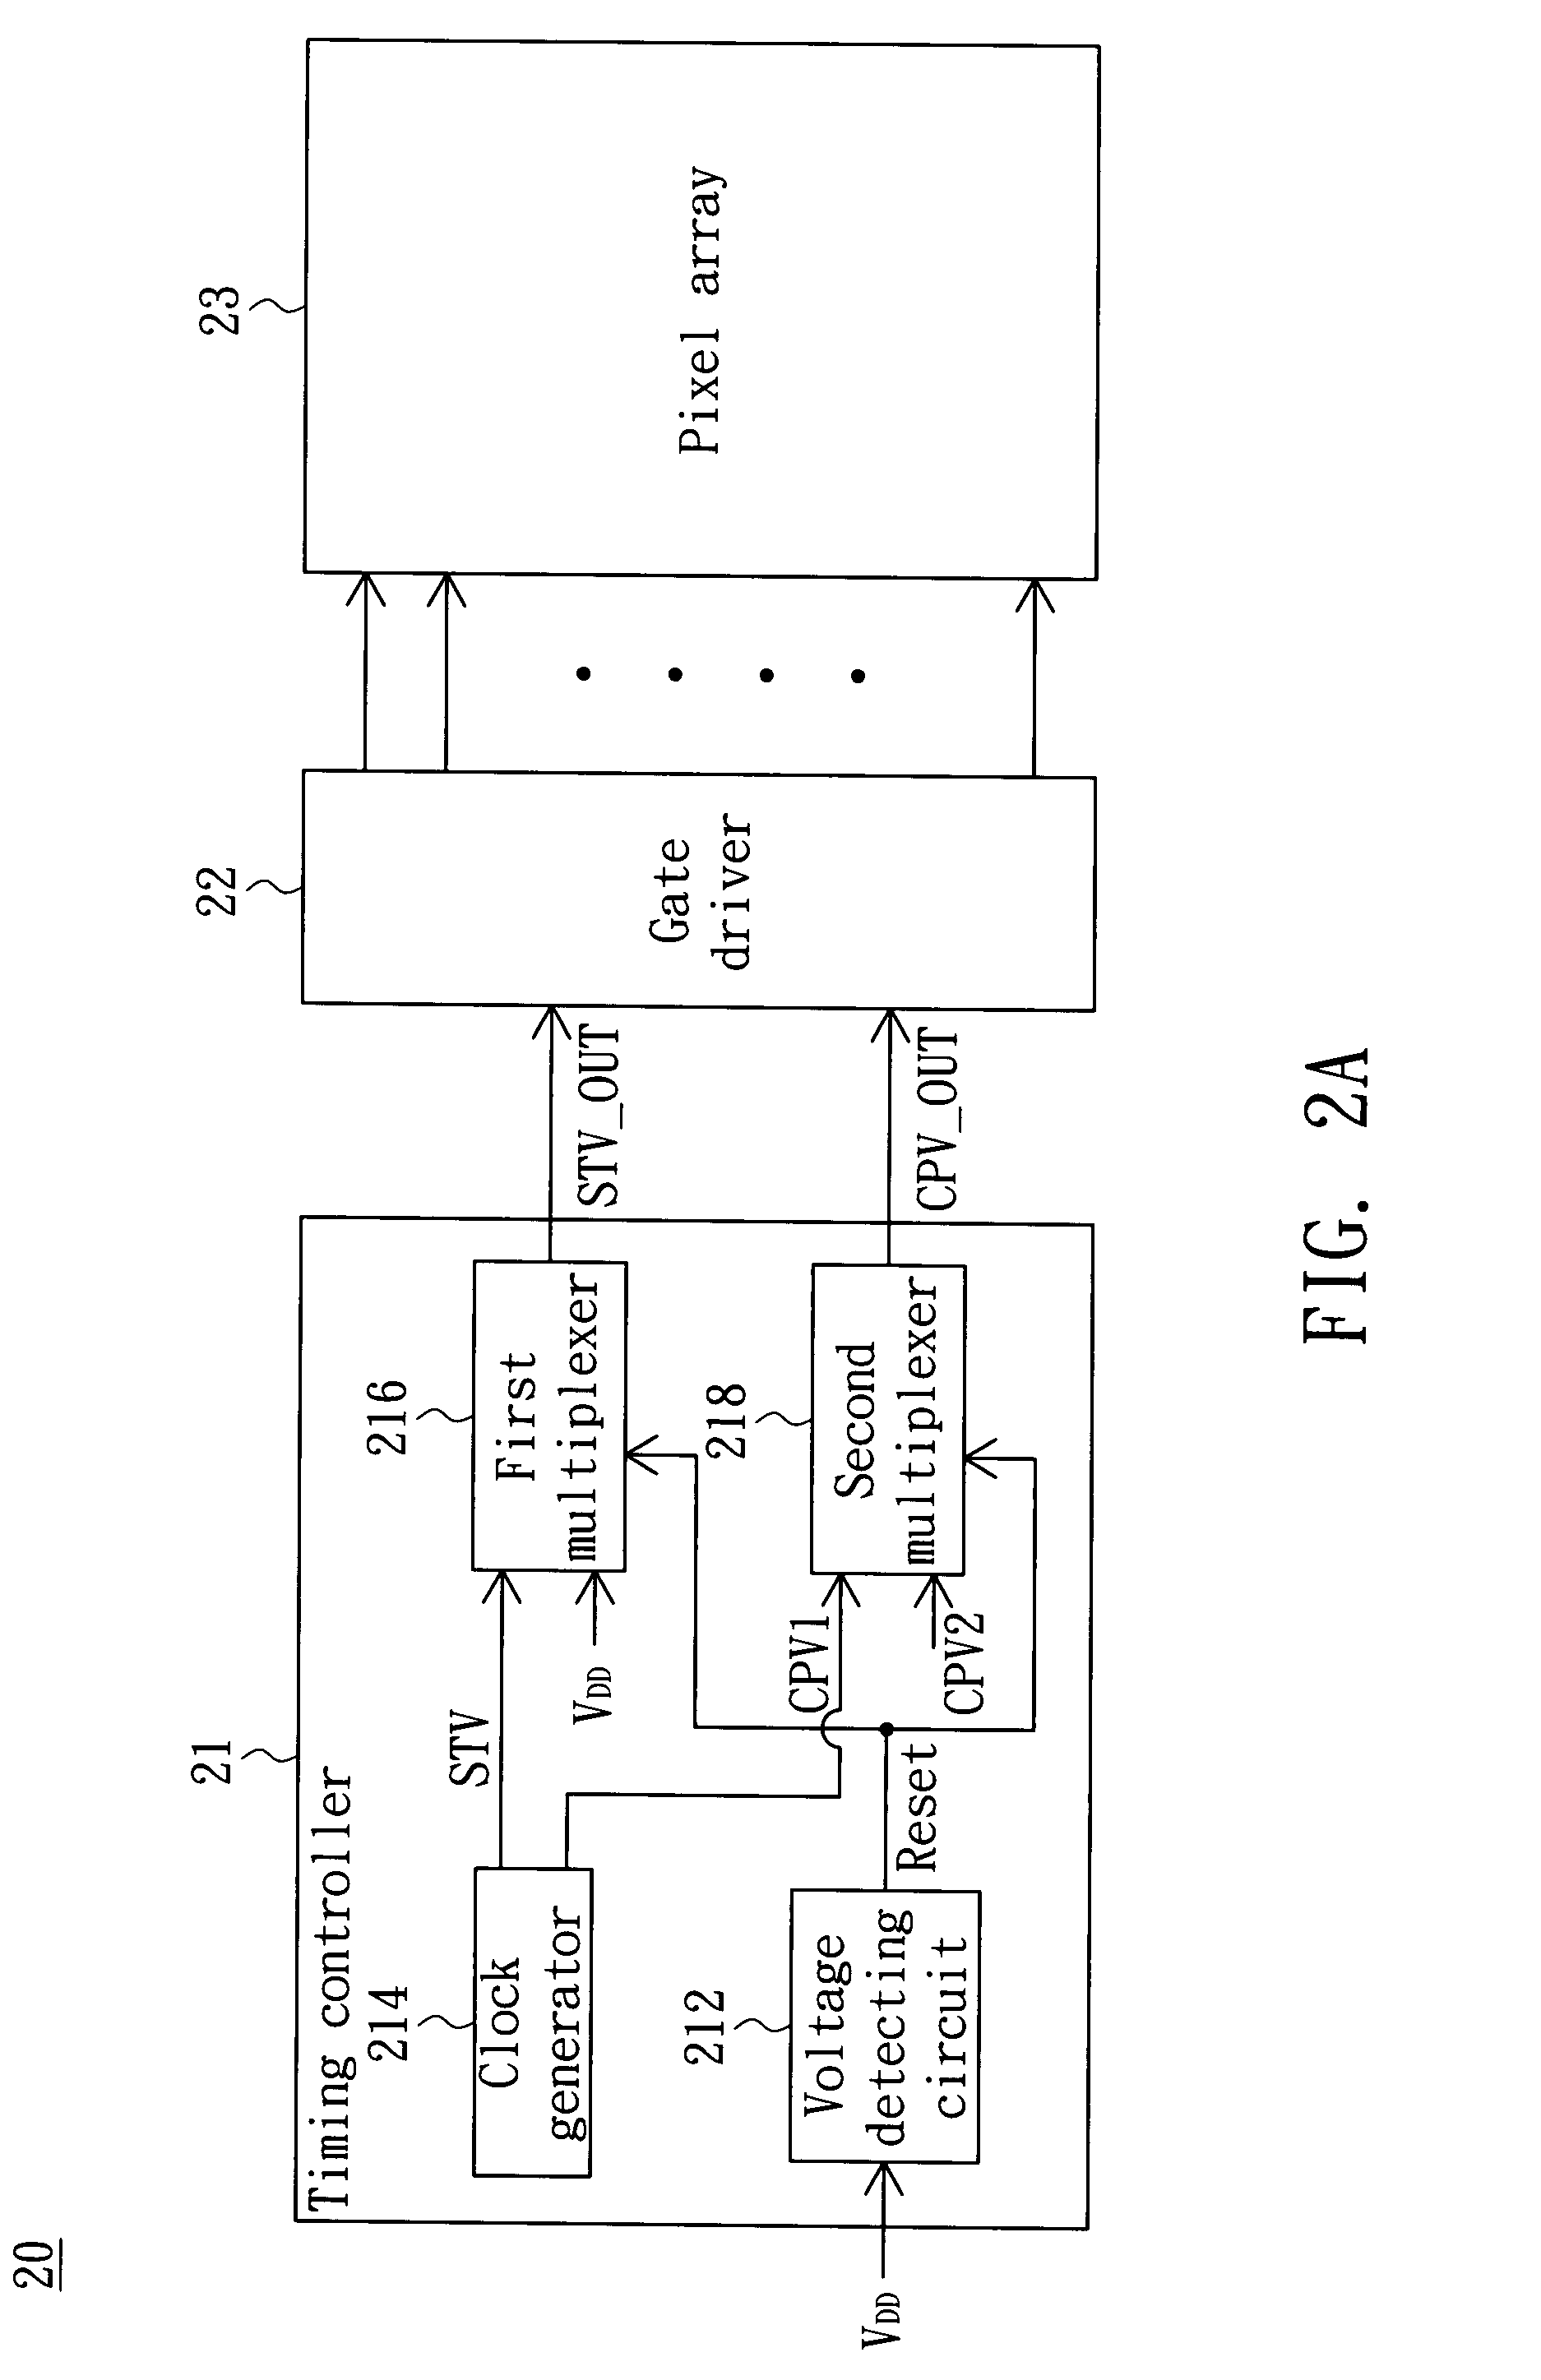 Flat display and timing controller thereof